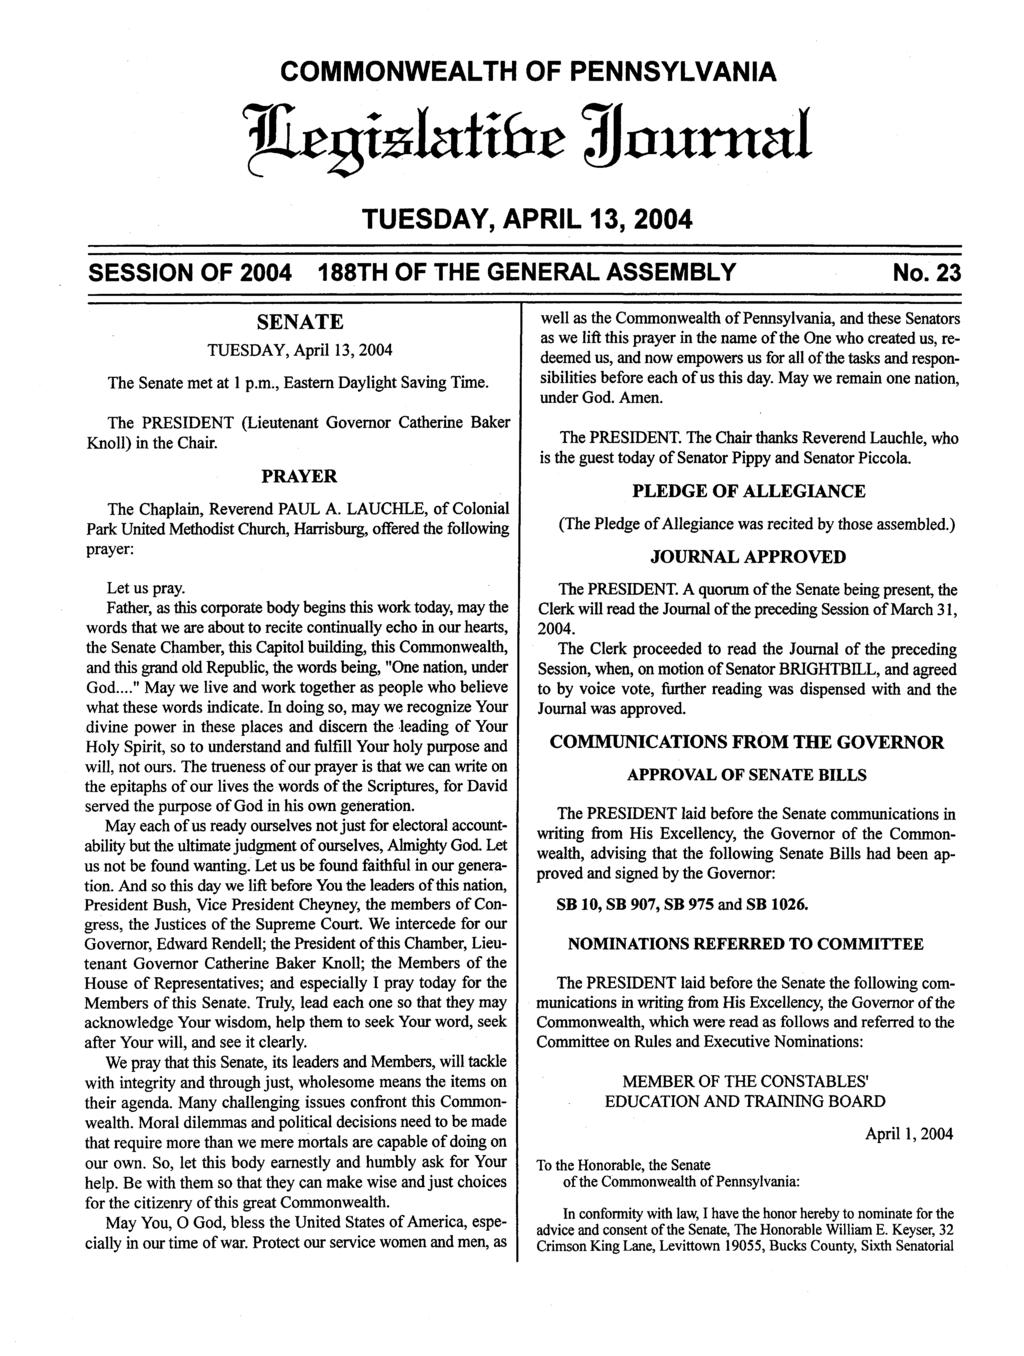 COMMONWEALTH OF PENNSYLVANIA TUESDAY, APRIL 13, 2004 SESSION OF 2004 188TH OF THE GENERAL ASSEMBLY No. 23 SENATE TUESDAY, April 13, 2004 The Senate met at 1 p.m., Eastern Daylight Saving Time.